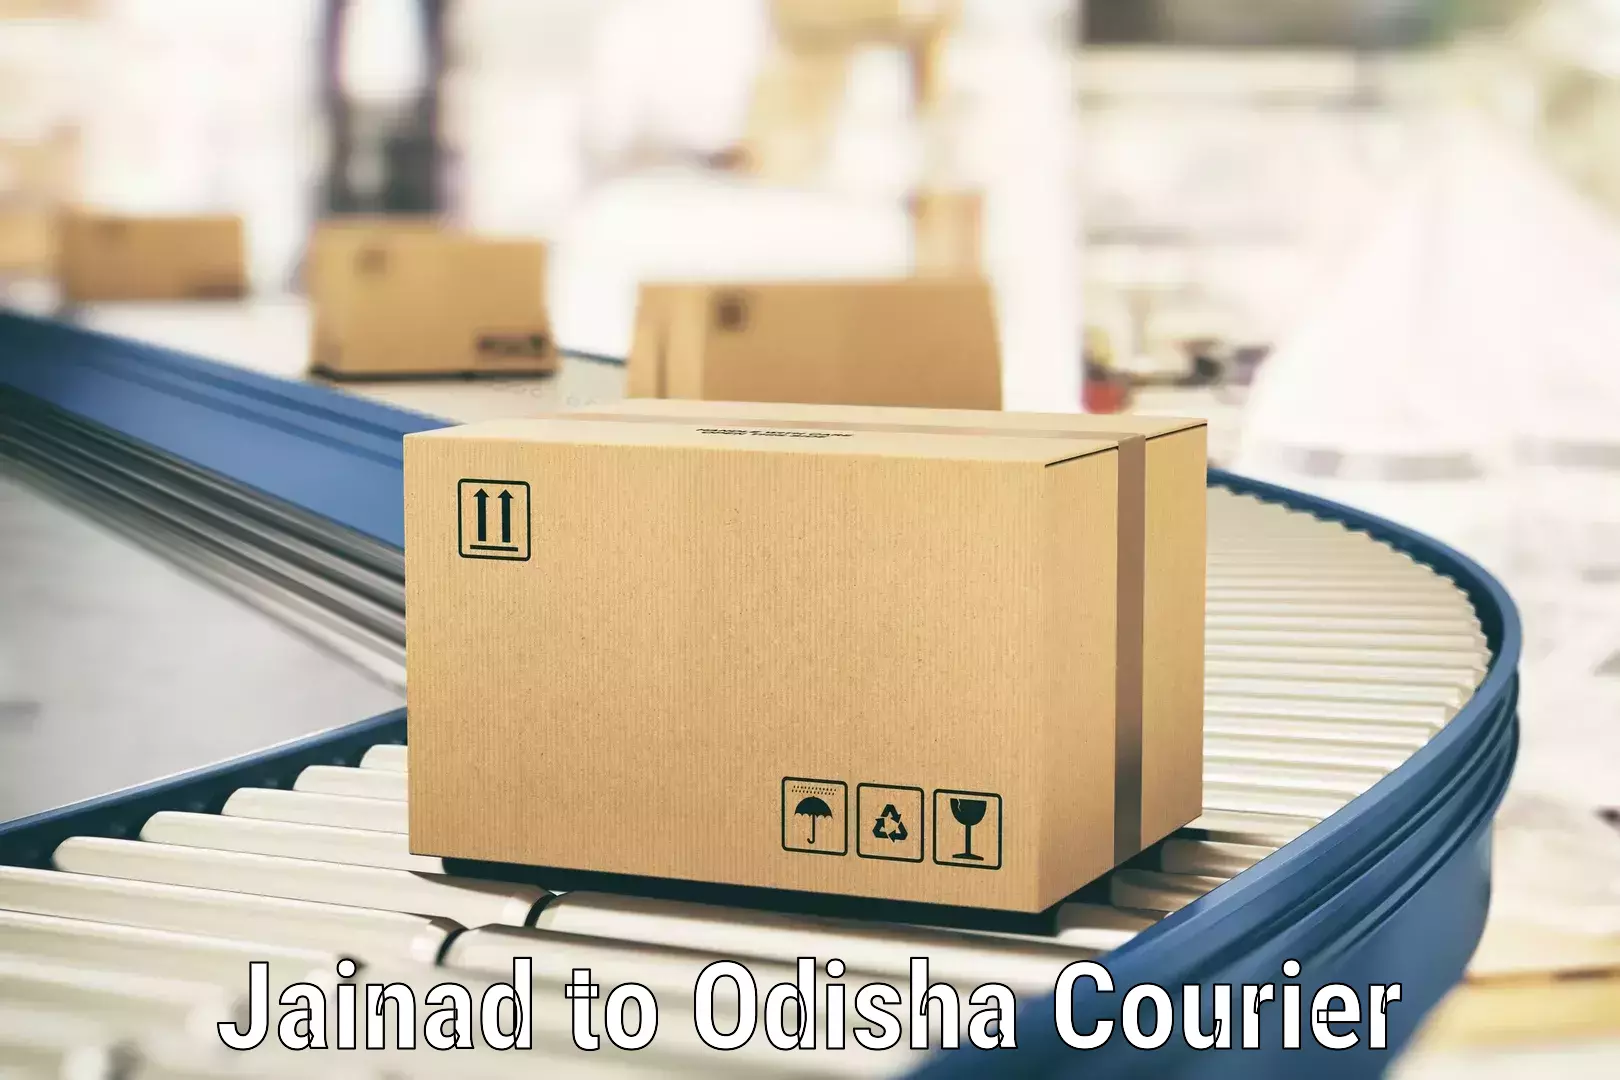 Full-service courier options Jainad to Garjanpur